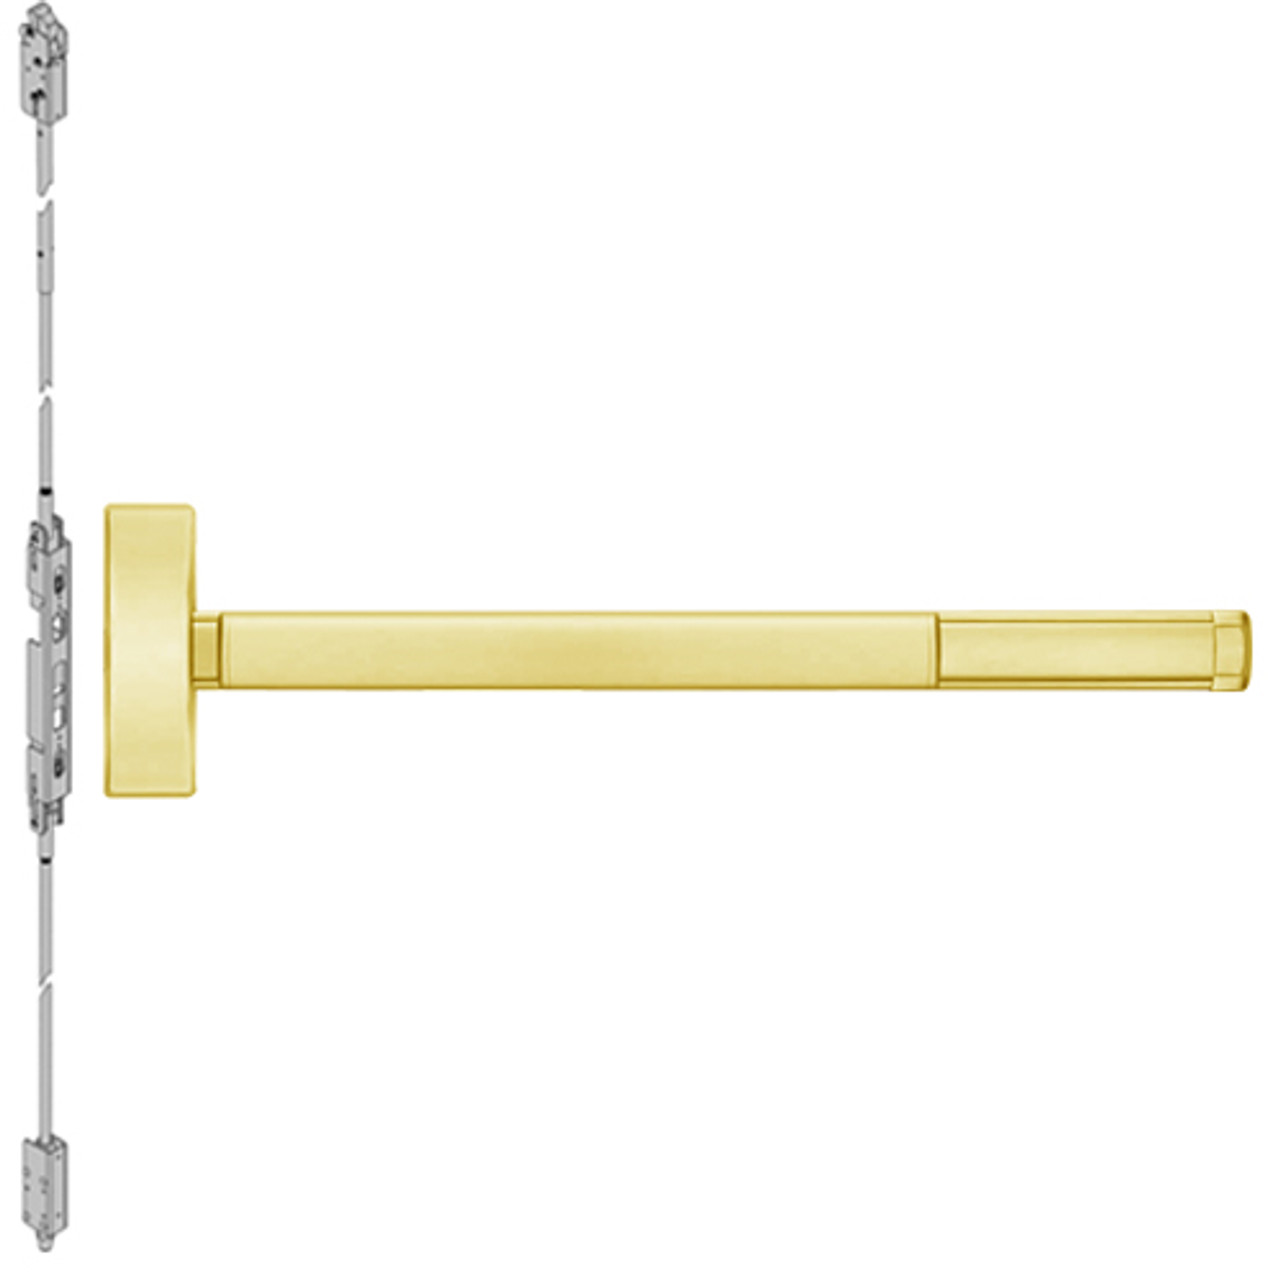 DEFL2802-605-36 PHI 2800 Series Fire Rated Concealed Vertical Rod Exit Device with Delayed Egress Prepped for Dummy Trim in Bright Brass Finish